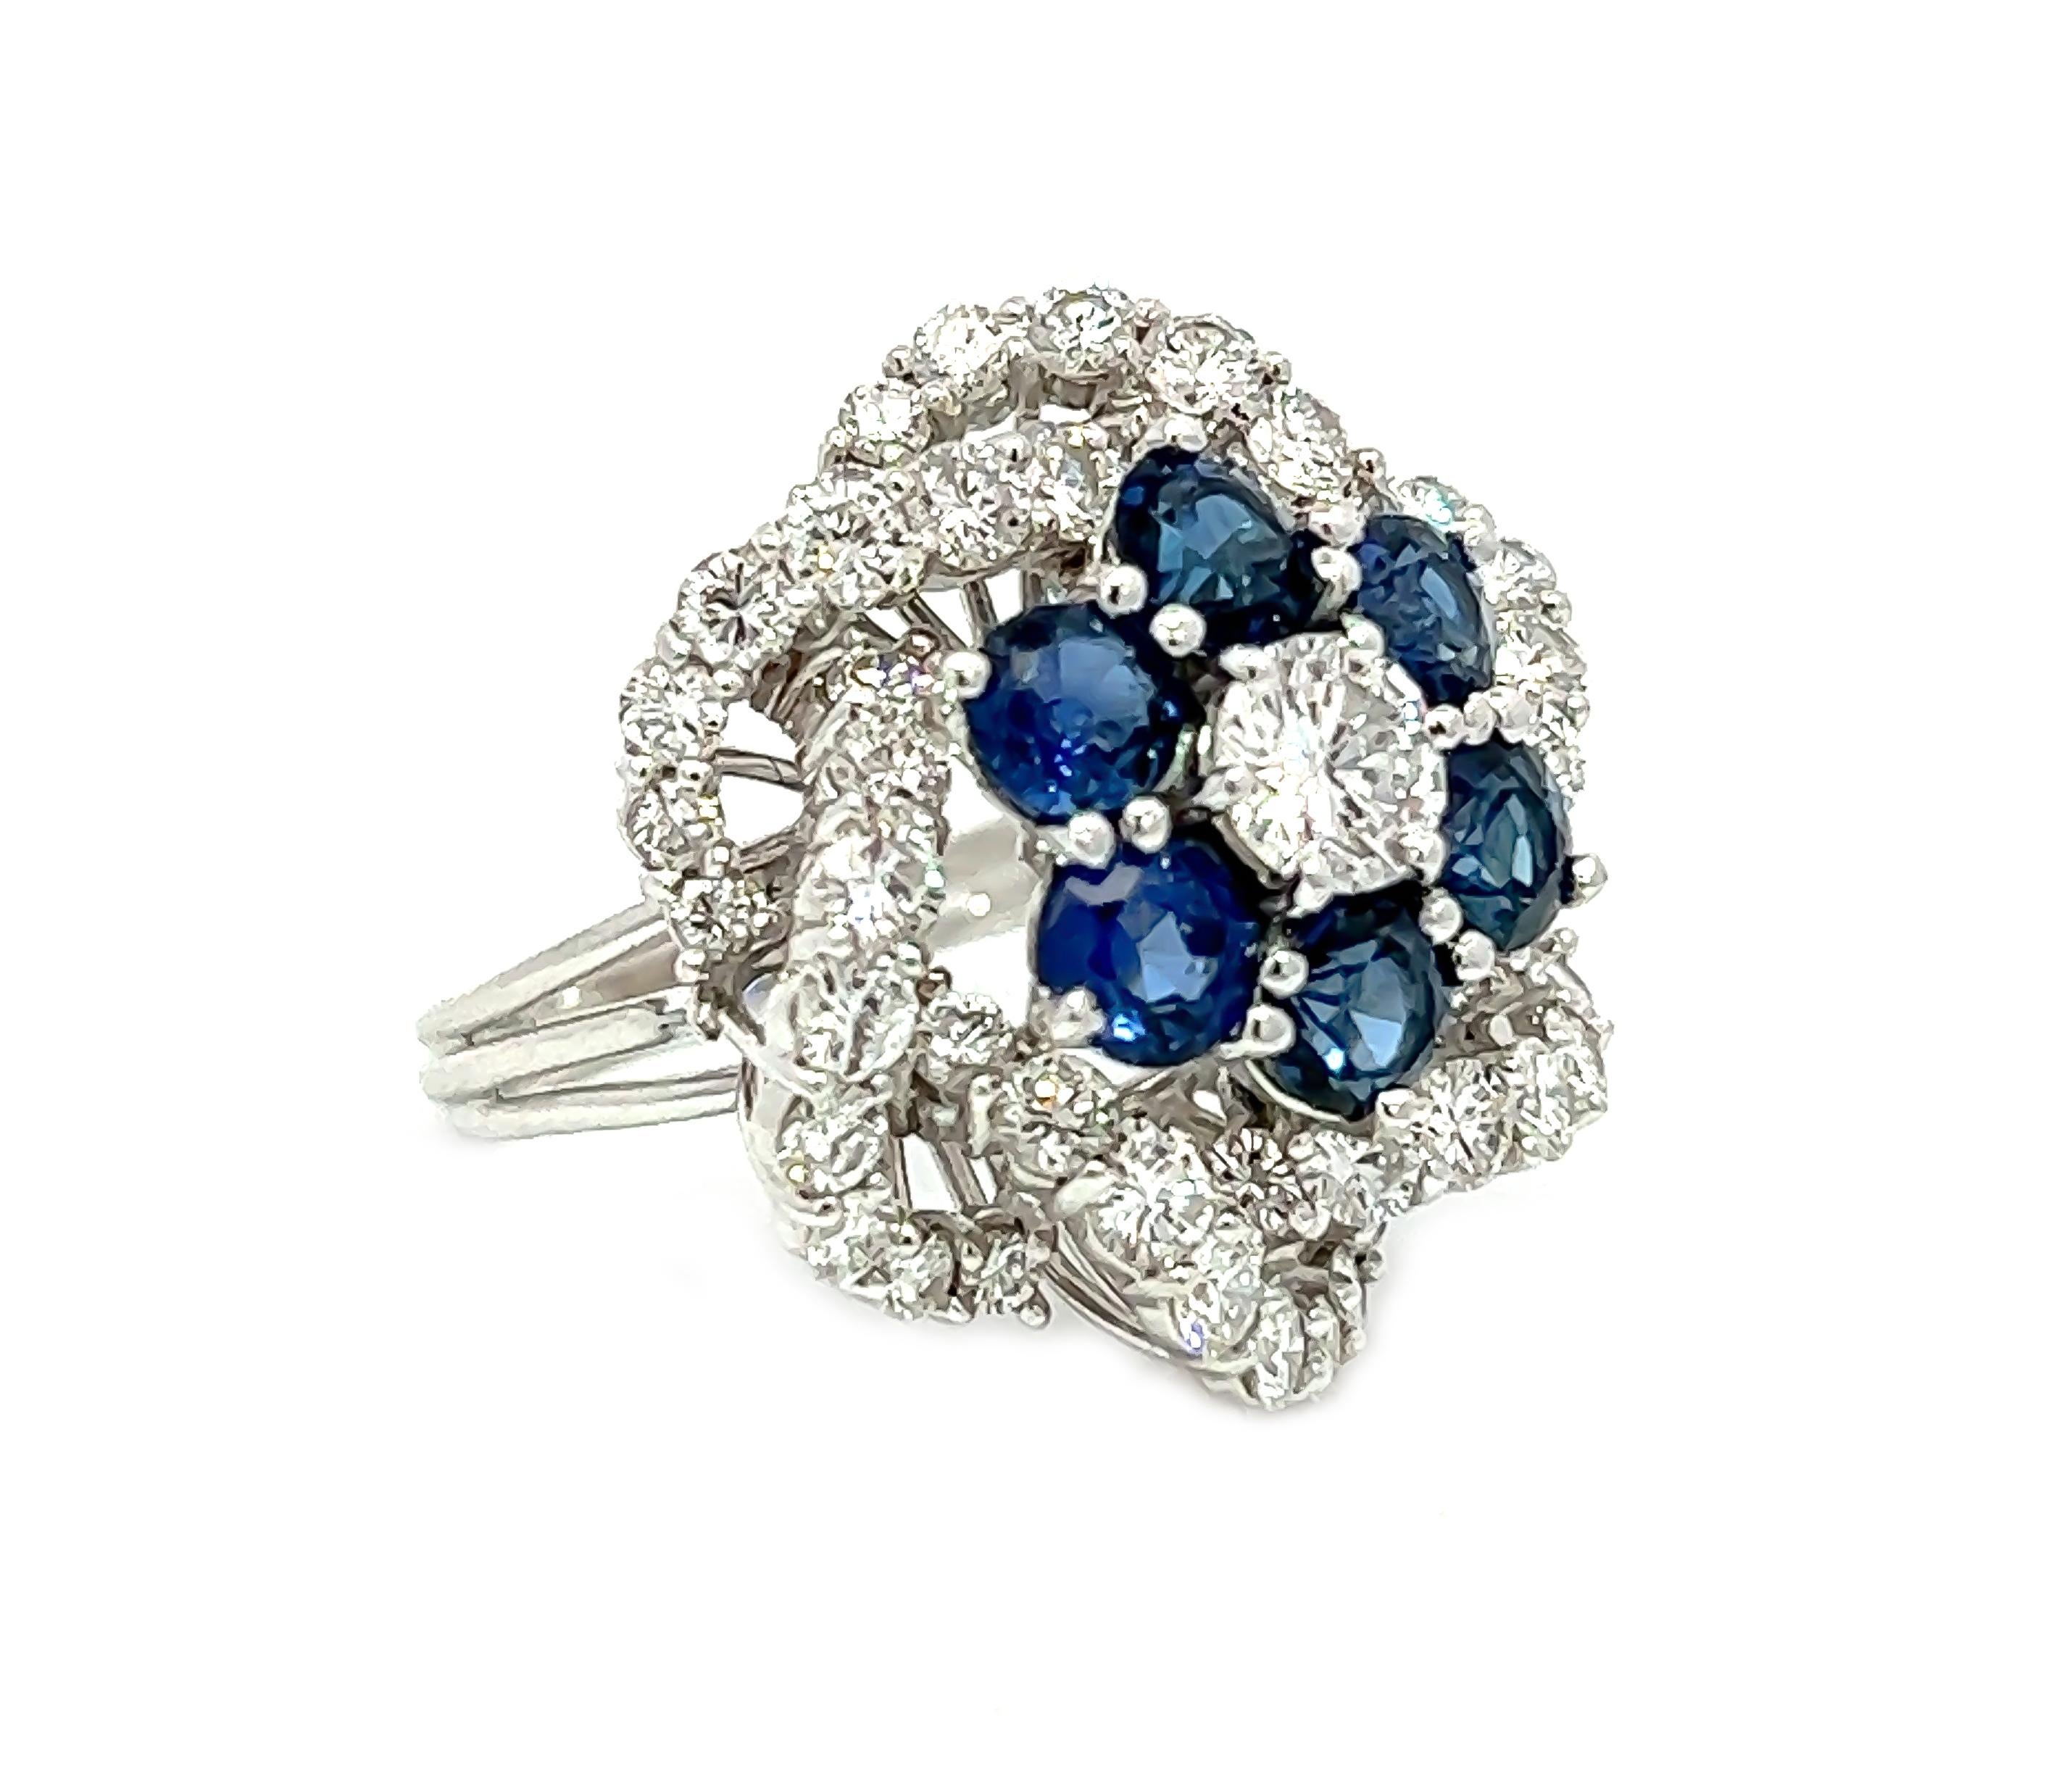 This exquisite ring boasts a truly unique setting, with a stunning 0.50 carat round brilliant diamond as the centerpiece of the flower design. It is further adorned with six sapphire stones, totaling an impressive 2.40 carats. Adding to its allure,